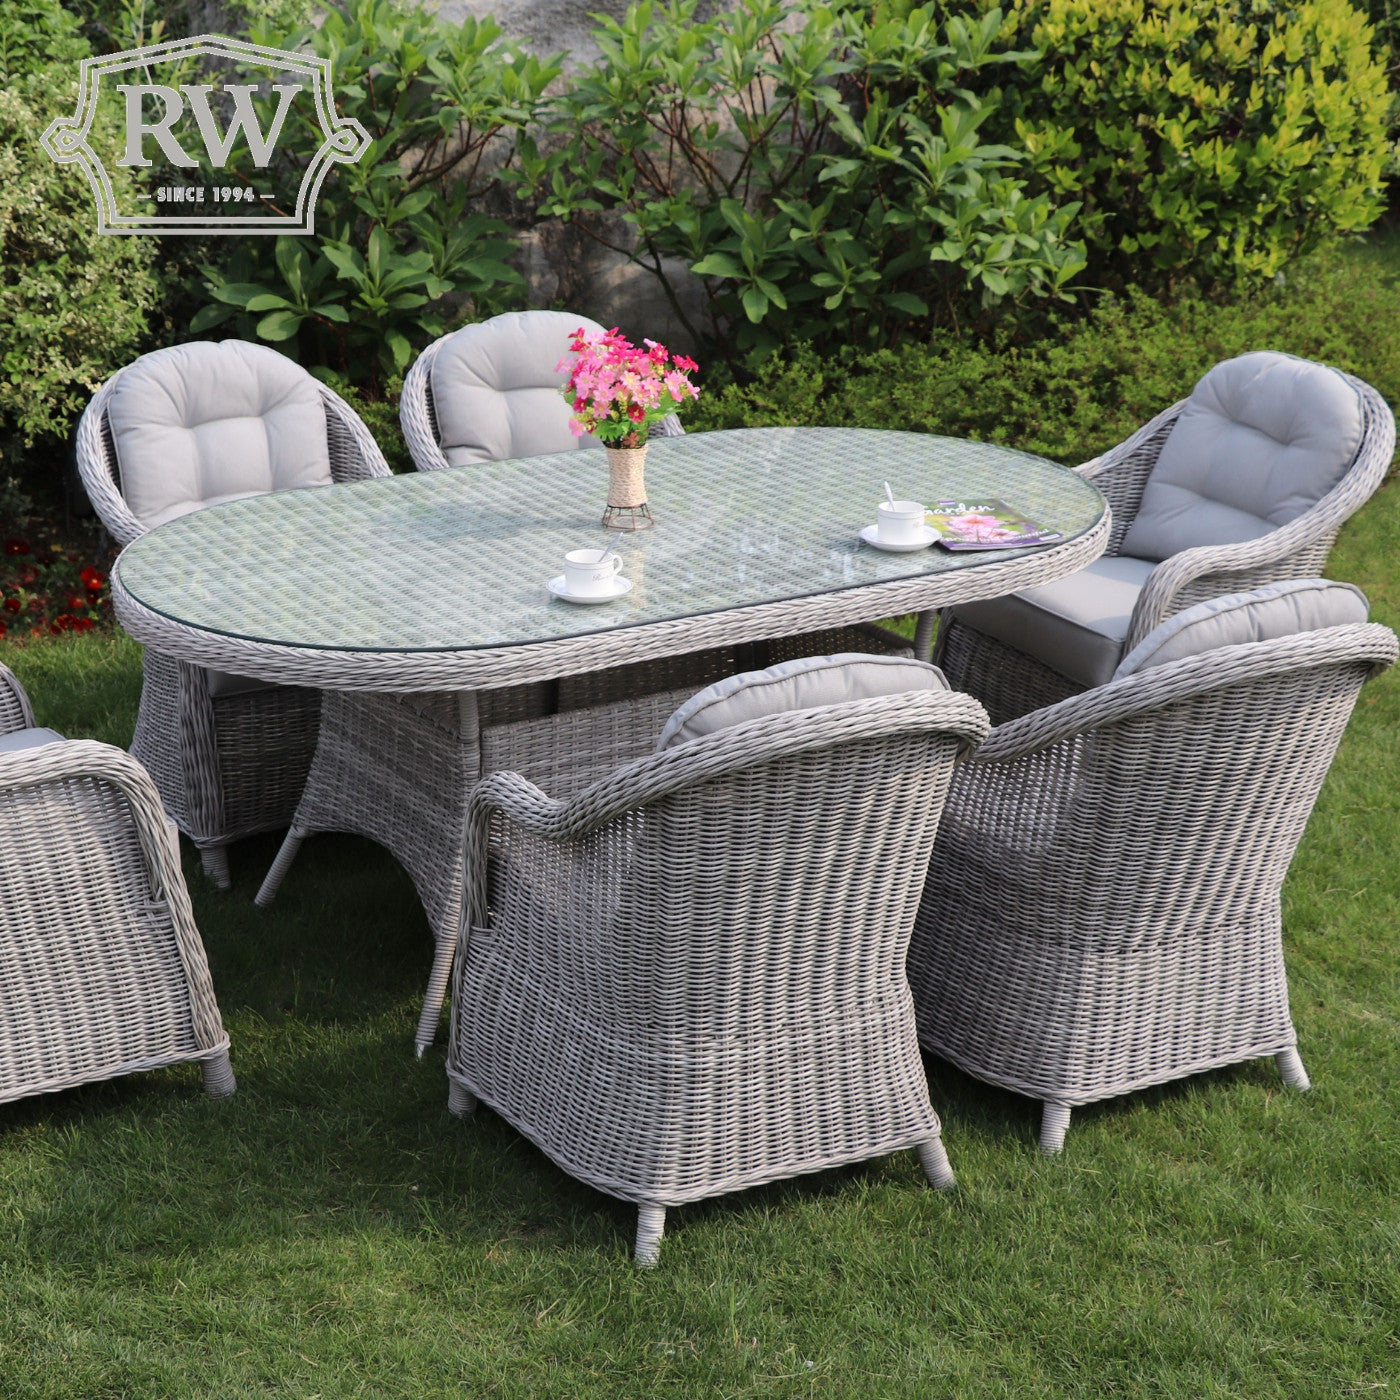 Sepino - 6 Seater Set with Oval Table & Lazy Susan (Light Grey)